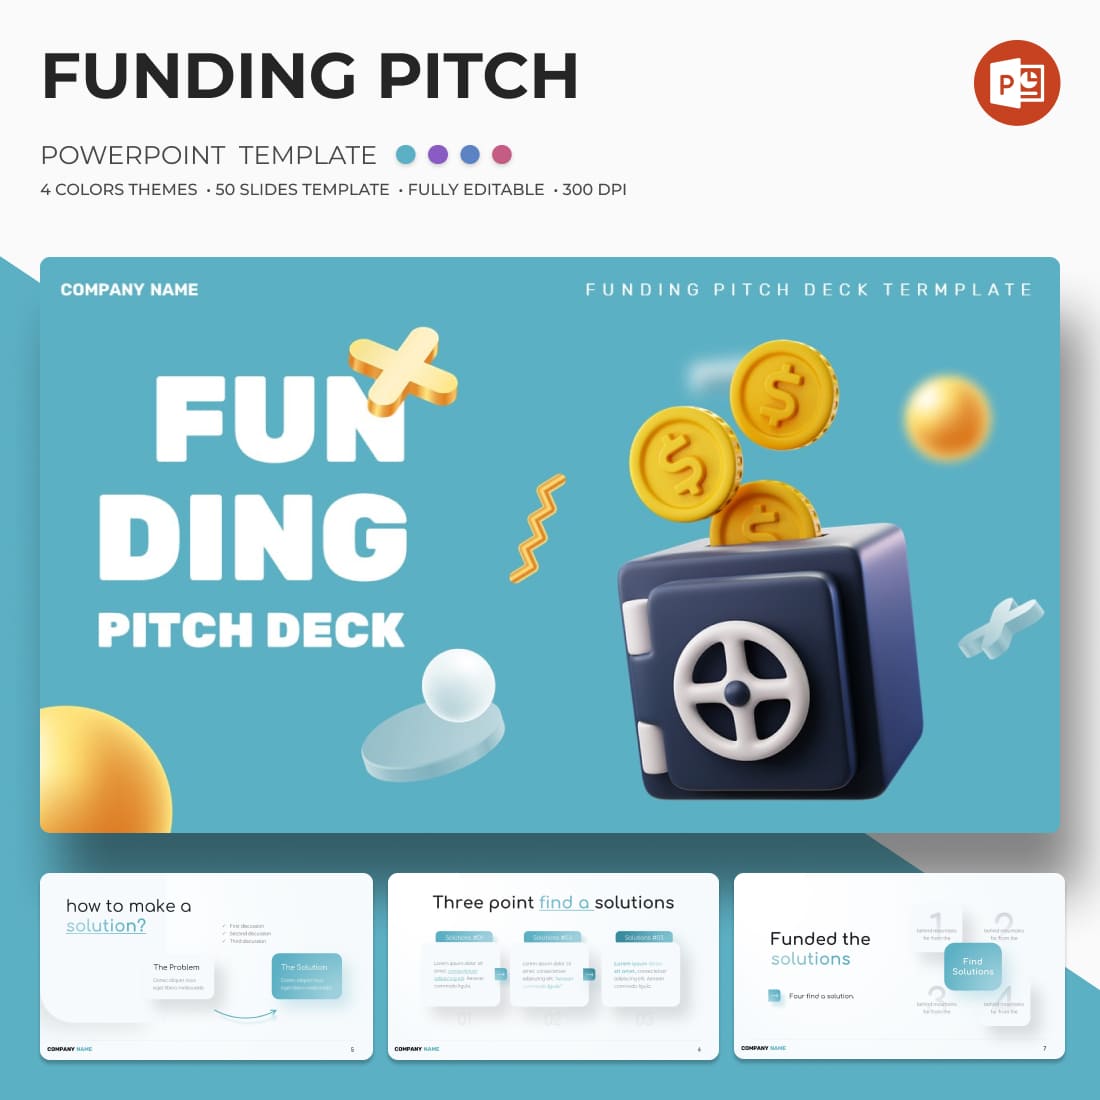 Funding Pitch Deck Powerpoint Template.